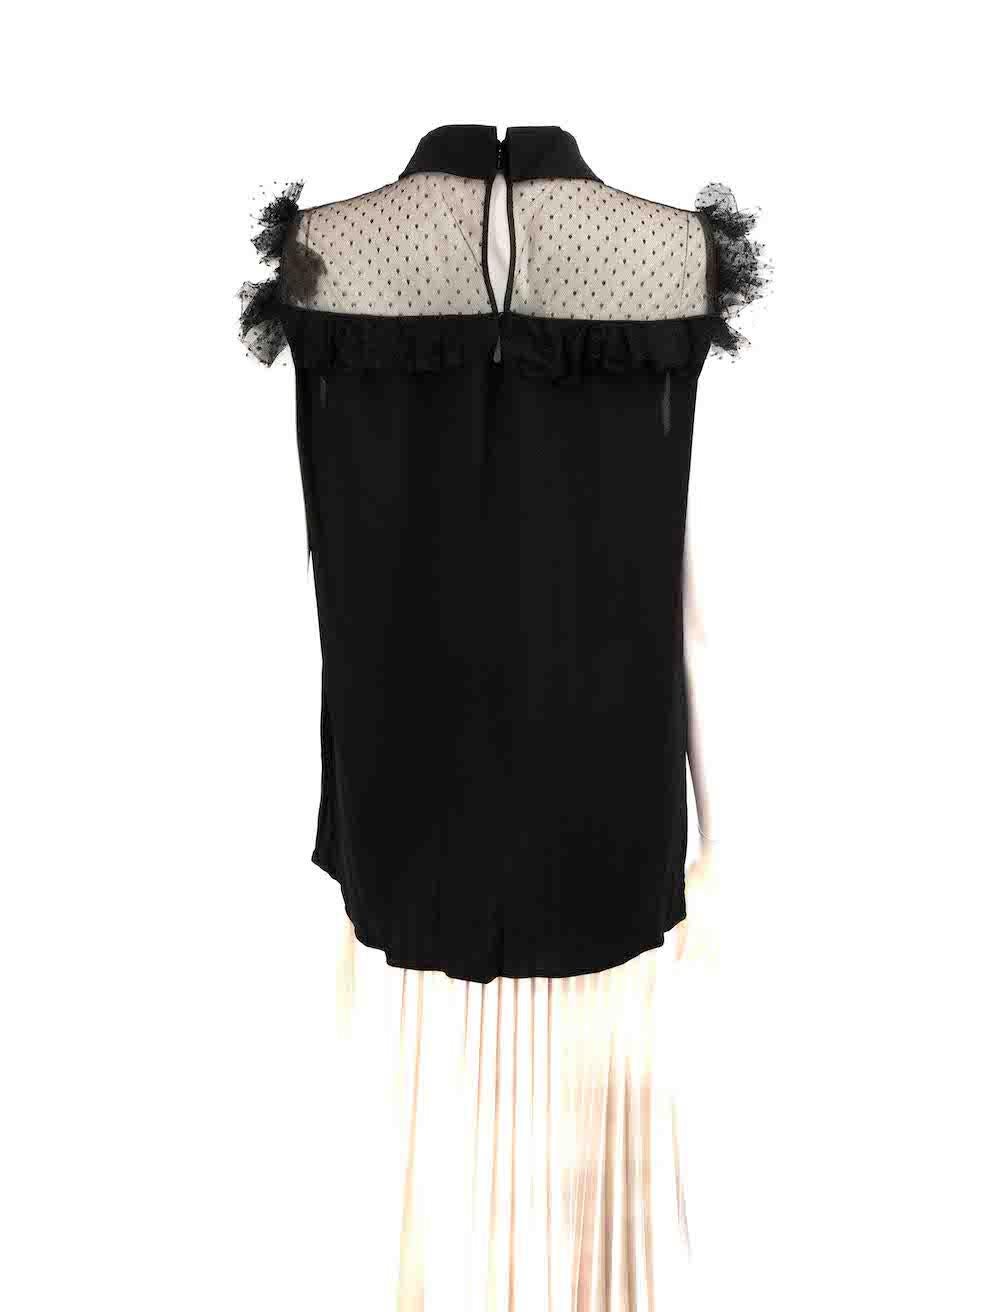 Miu Miu Black Lace Trim Ruffles Sleeveless Top Size XL In Excellent Condition For Sale In London, GB